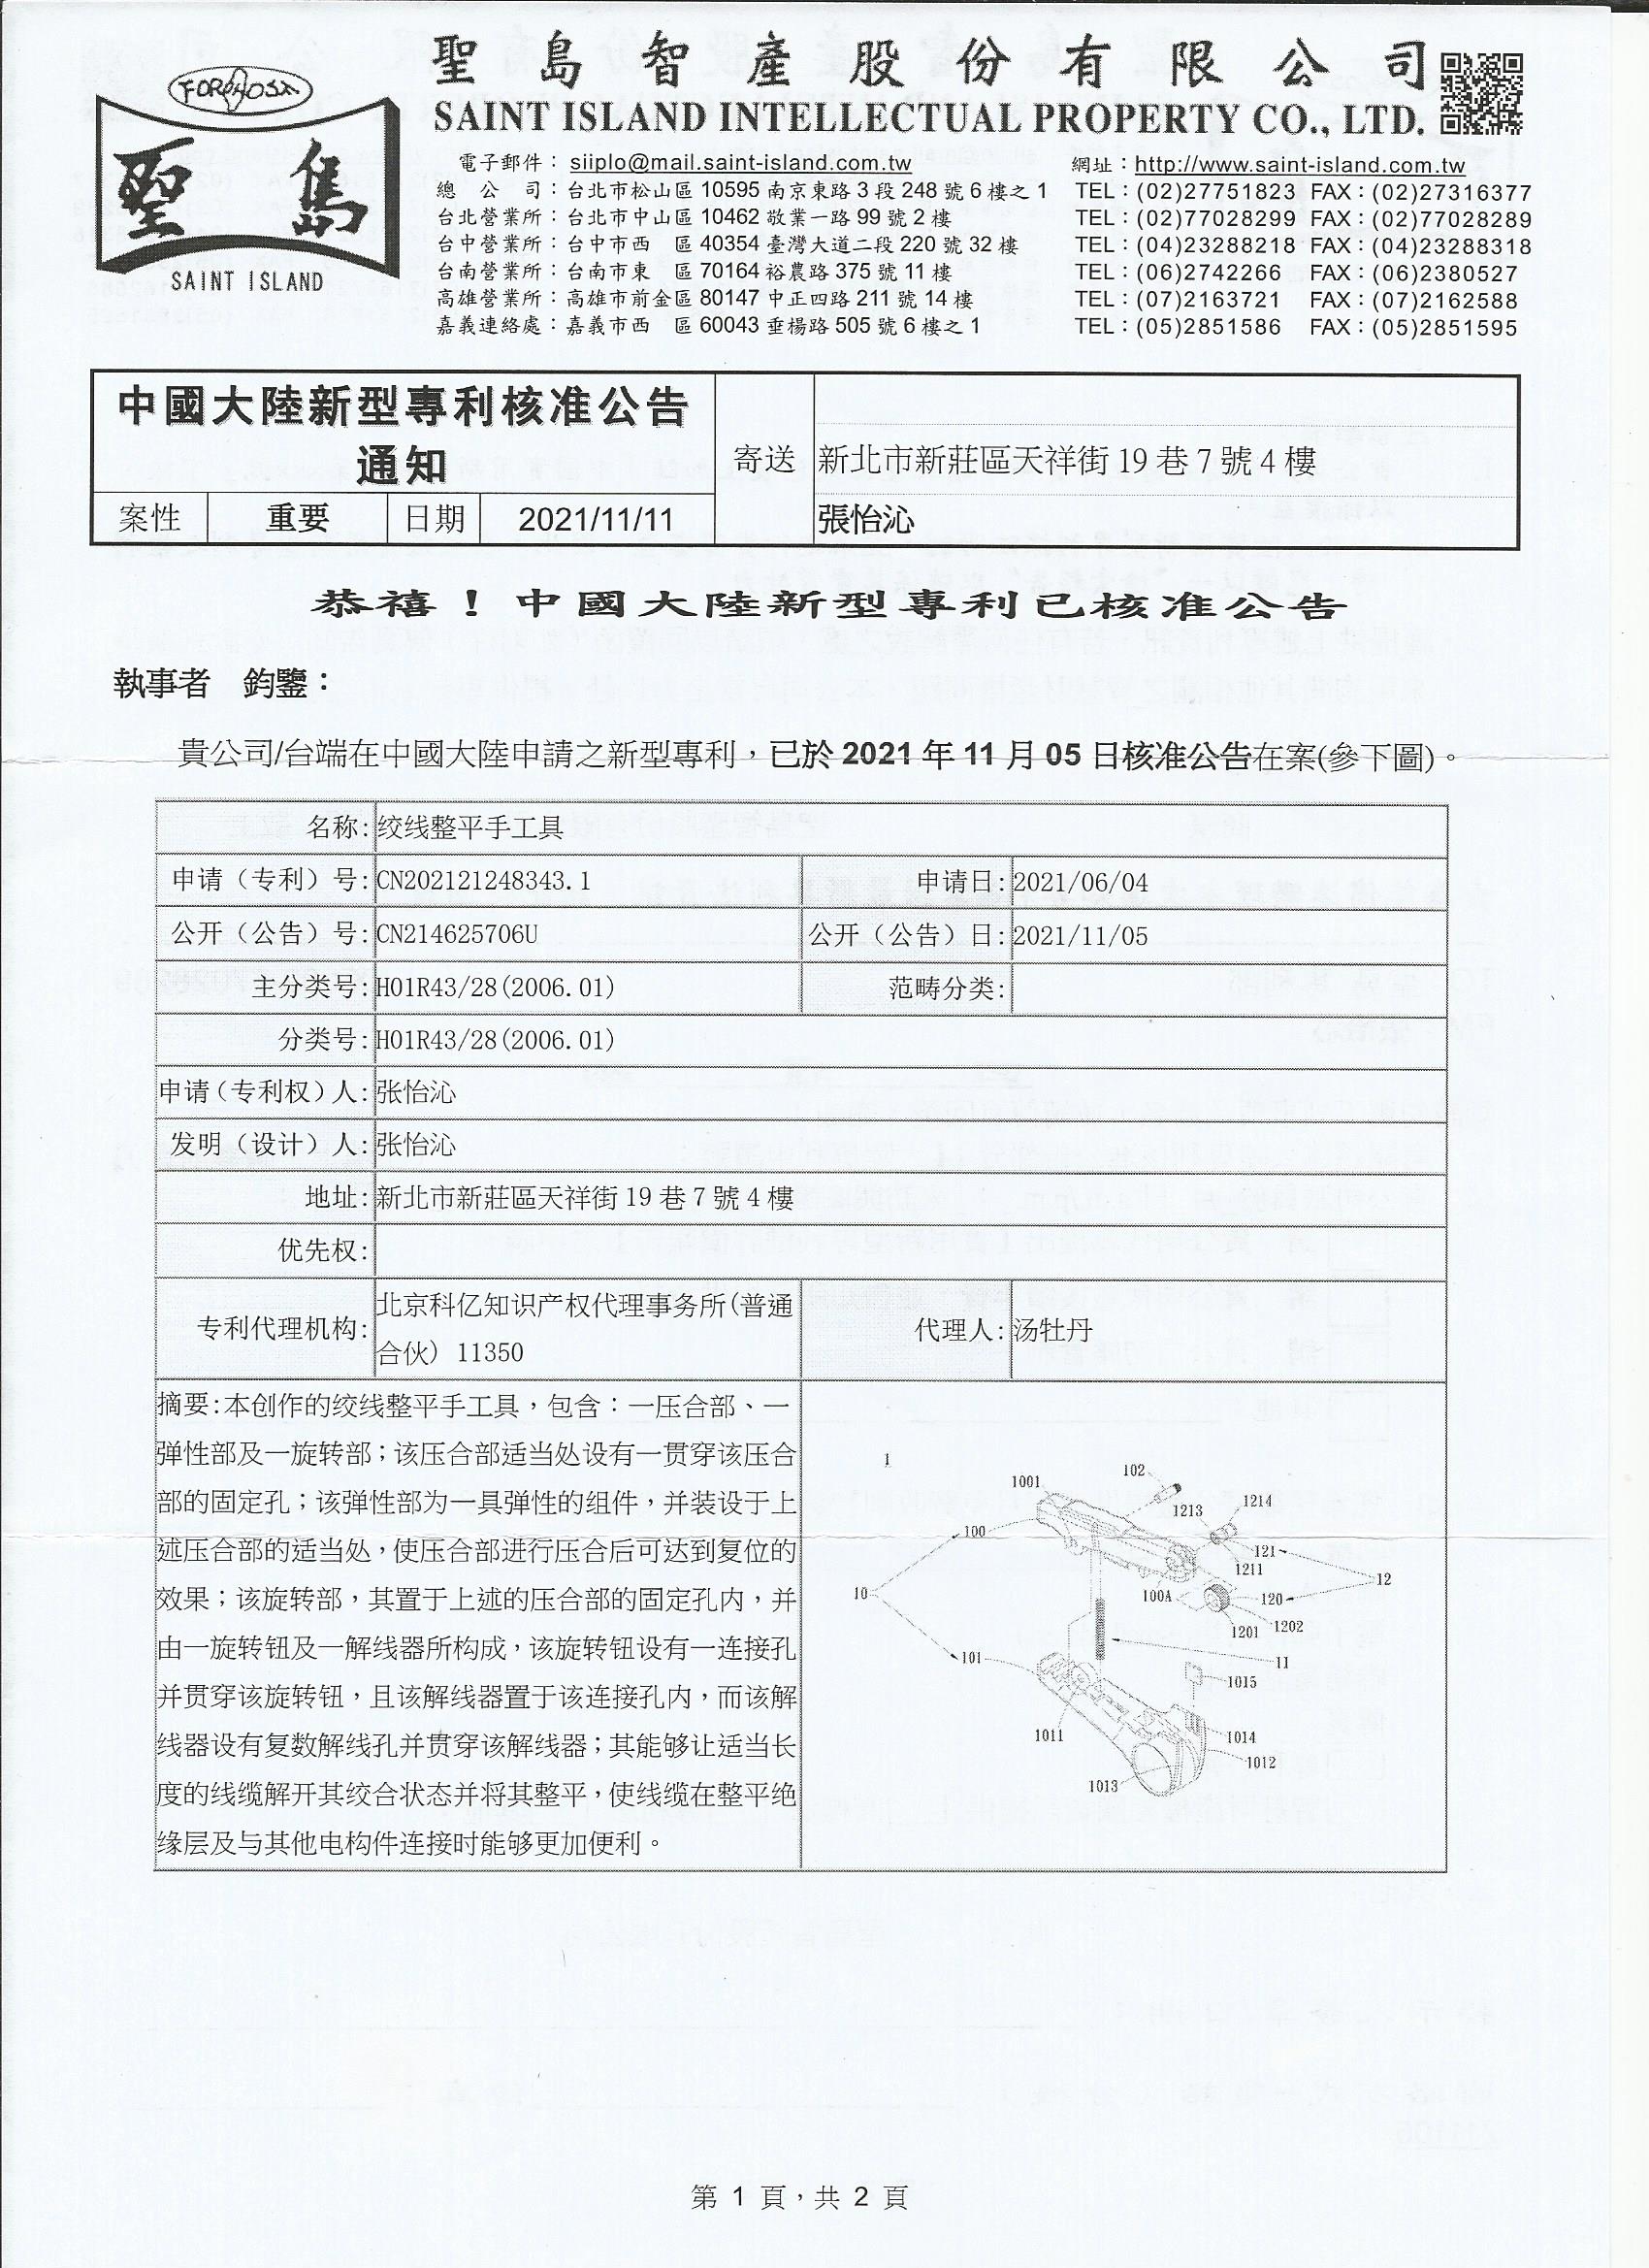 Patented In China (CN2021121248343.1)